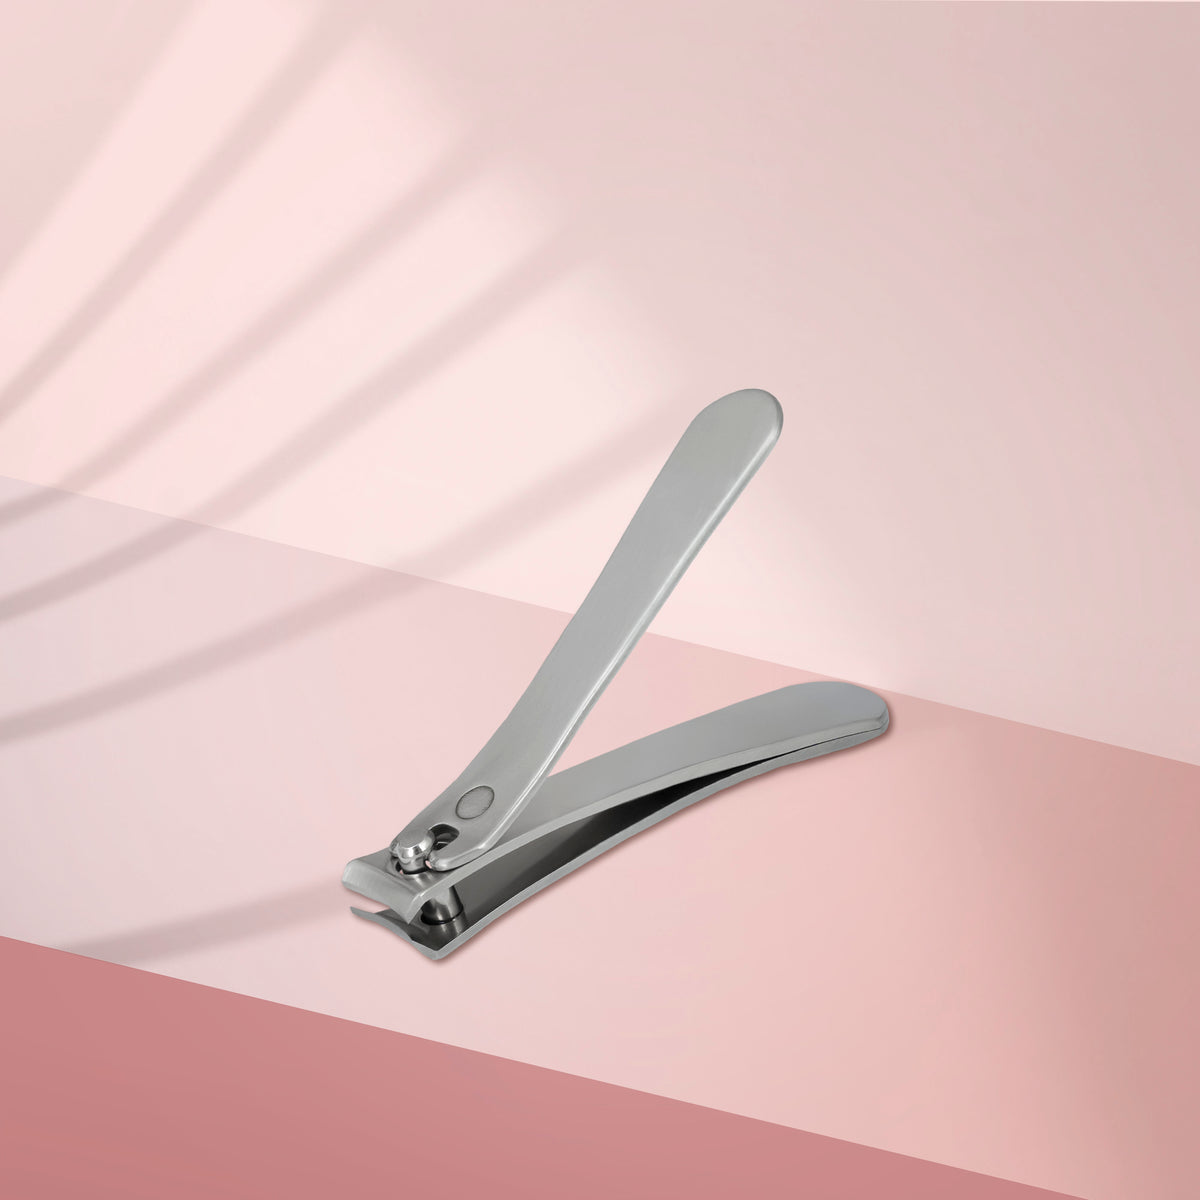 Large nail clippers BEAUTY & CARE 11 – STALEKS